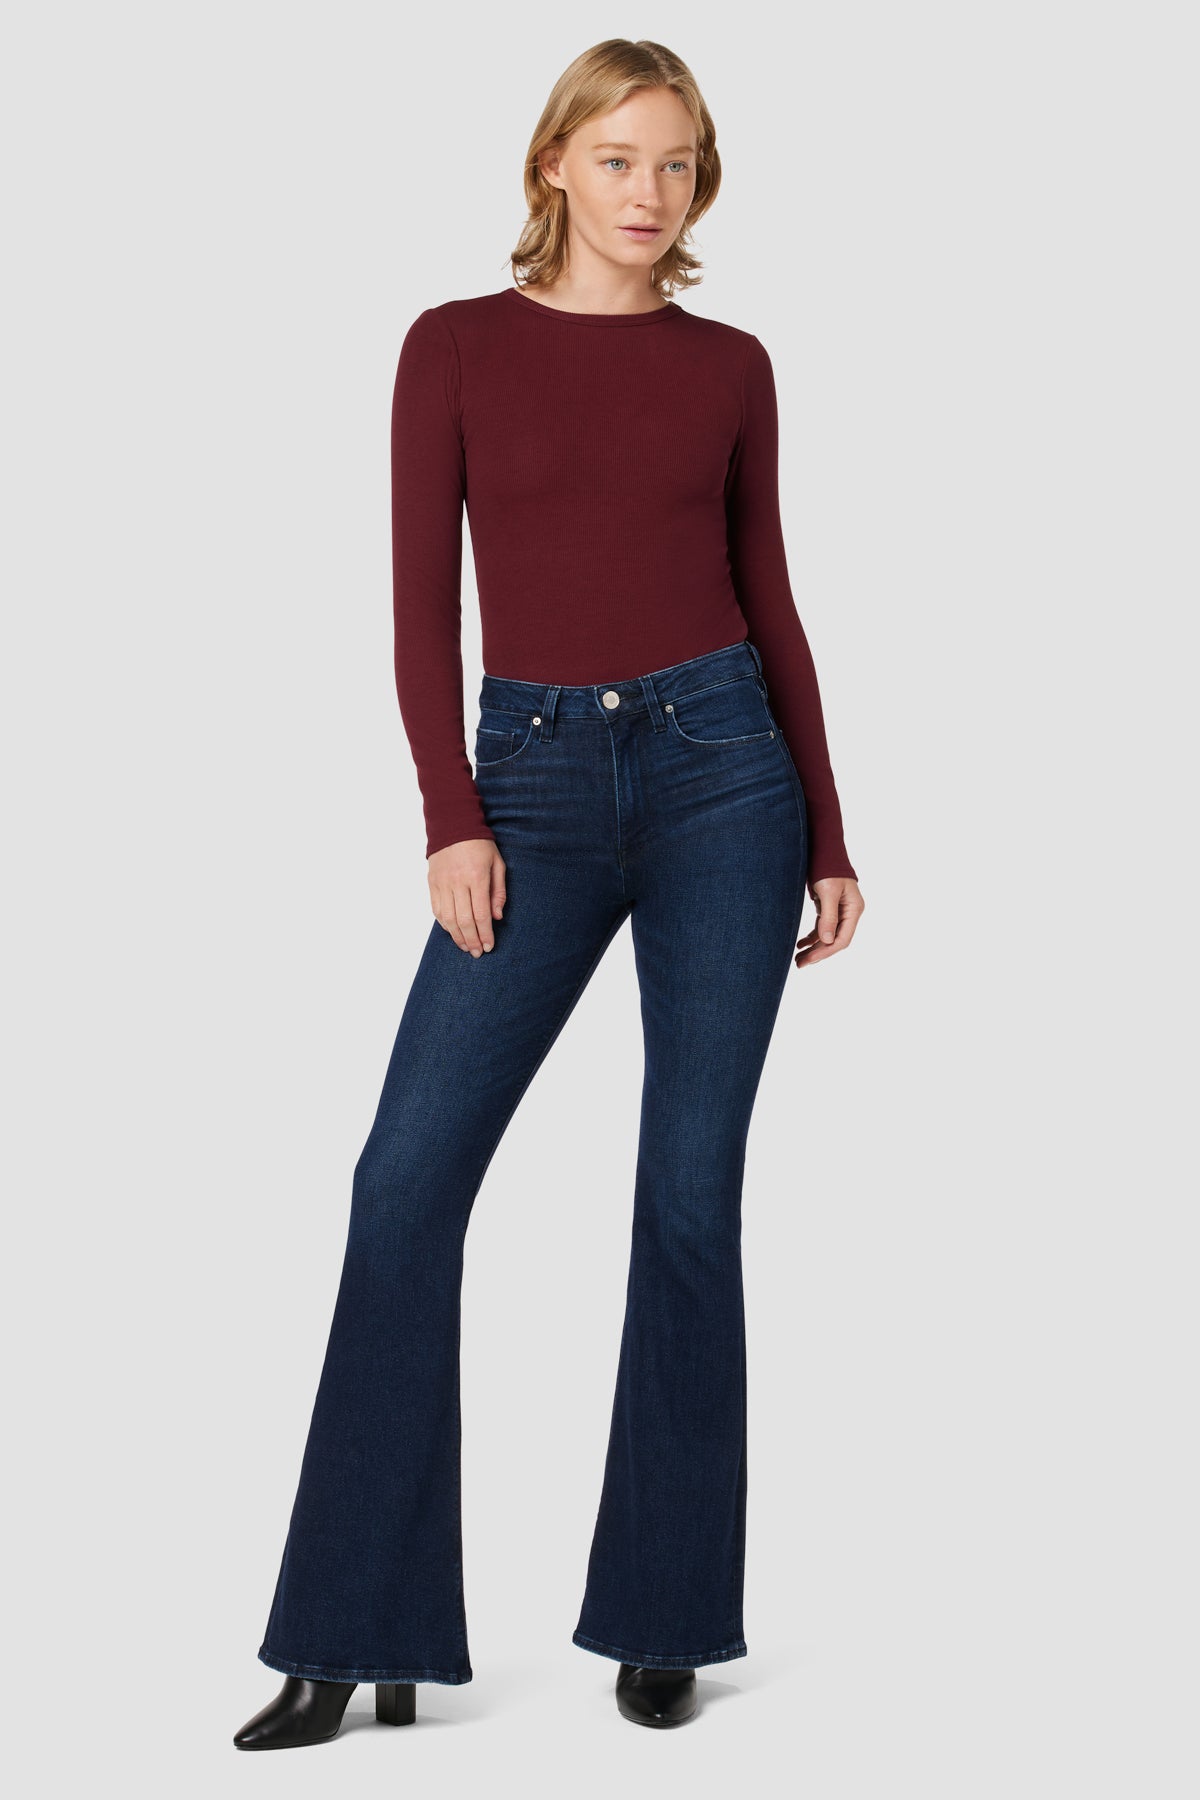 Grab Trendy Flared Jeans | Womenswear | Pepe Jeans India